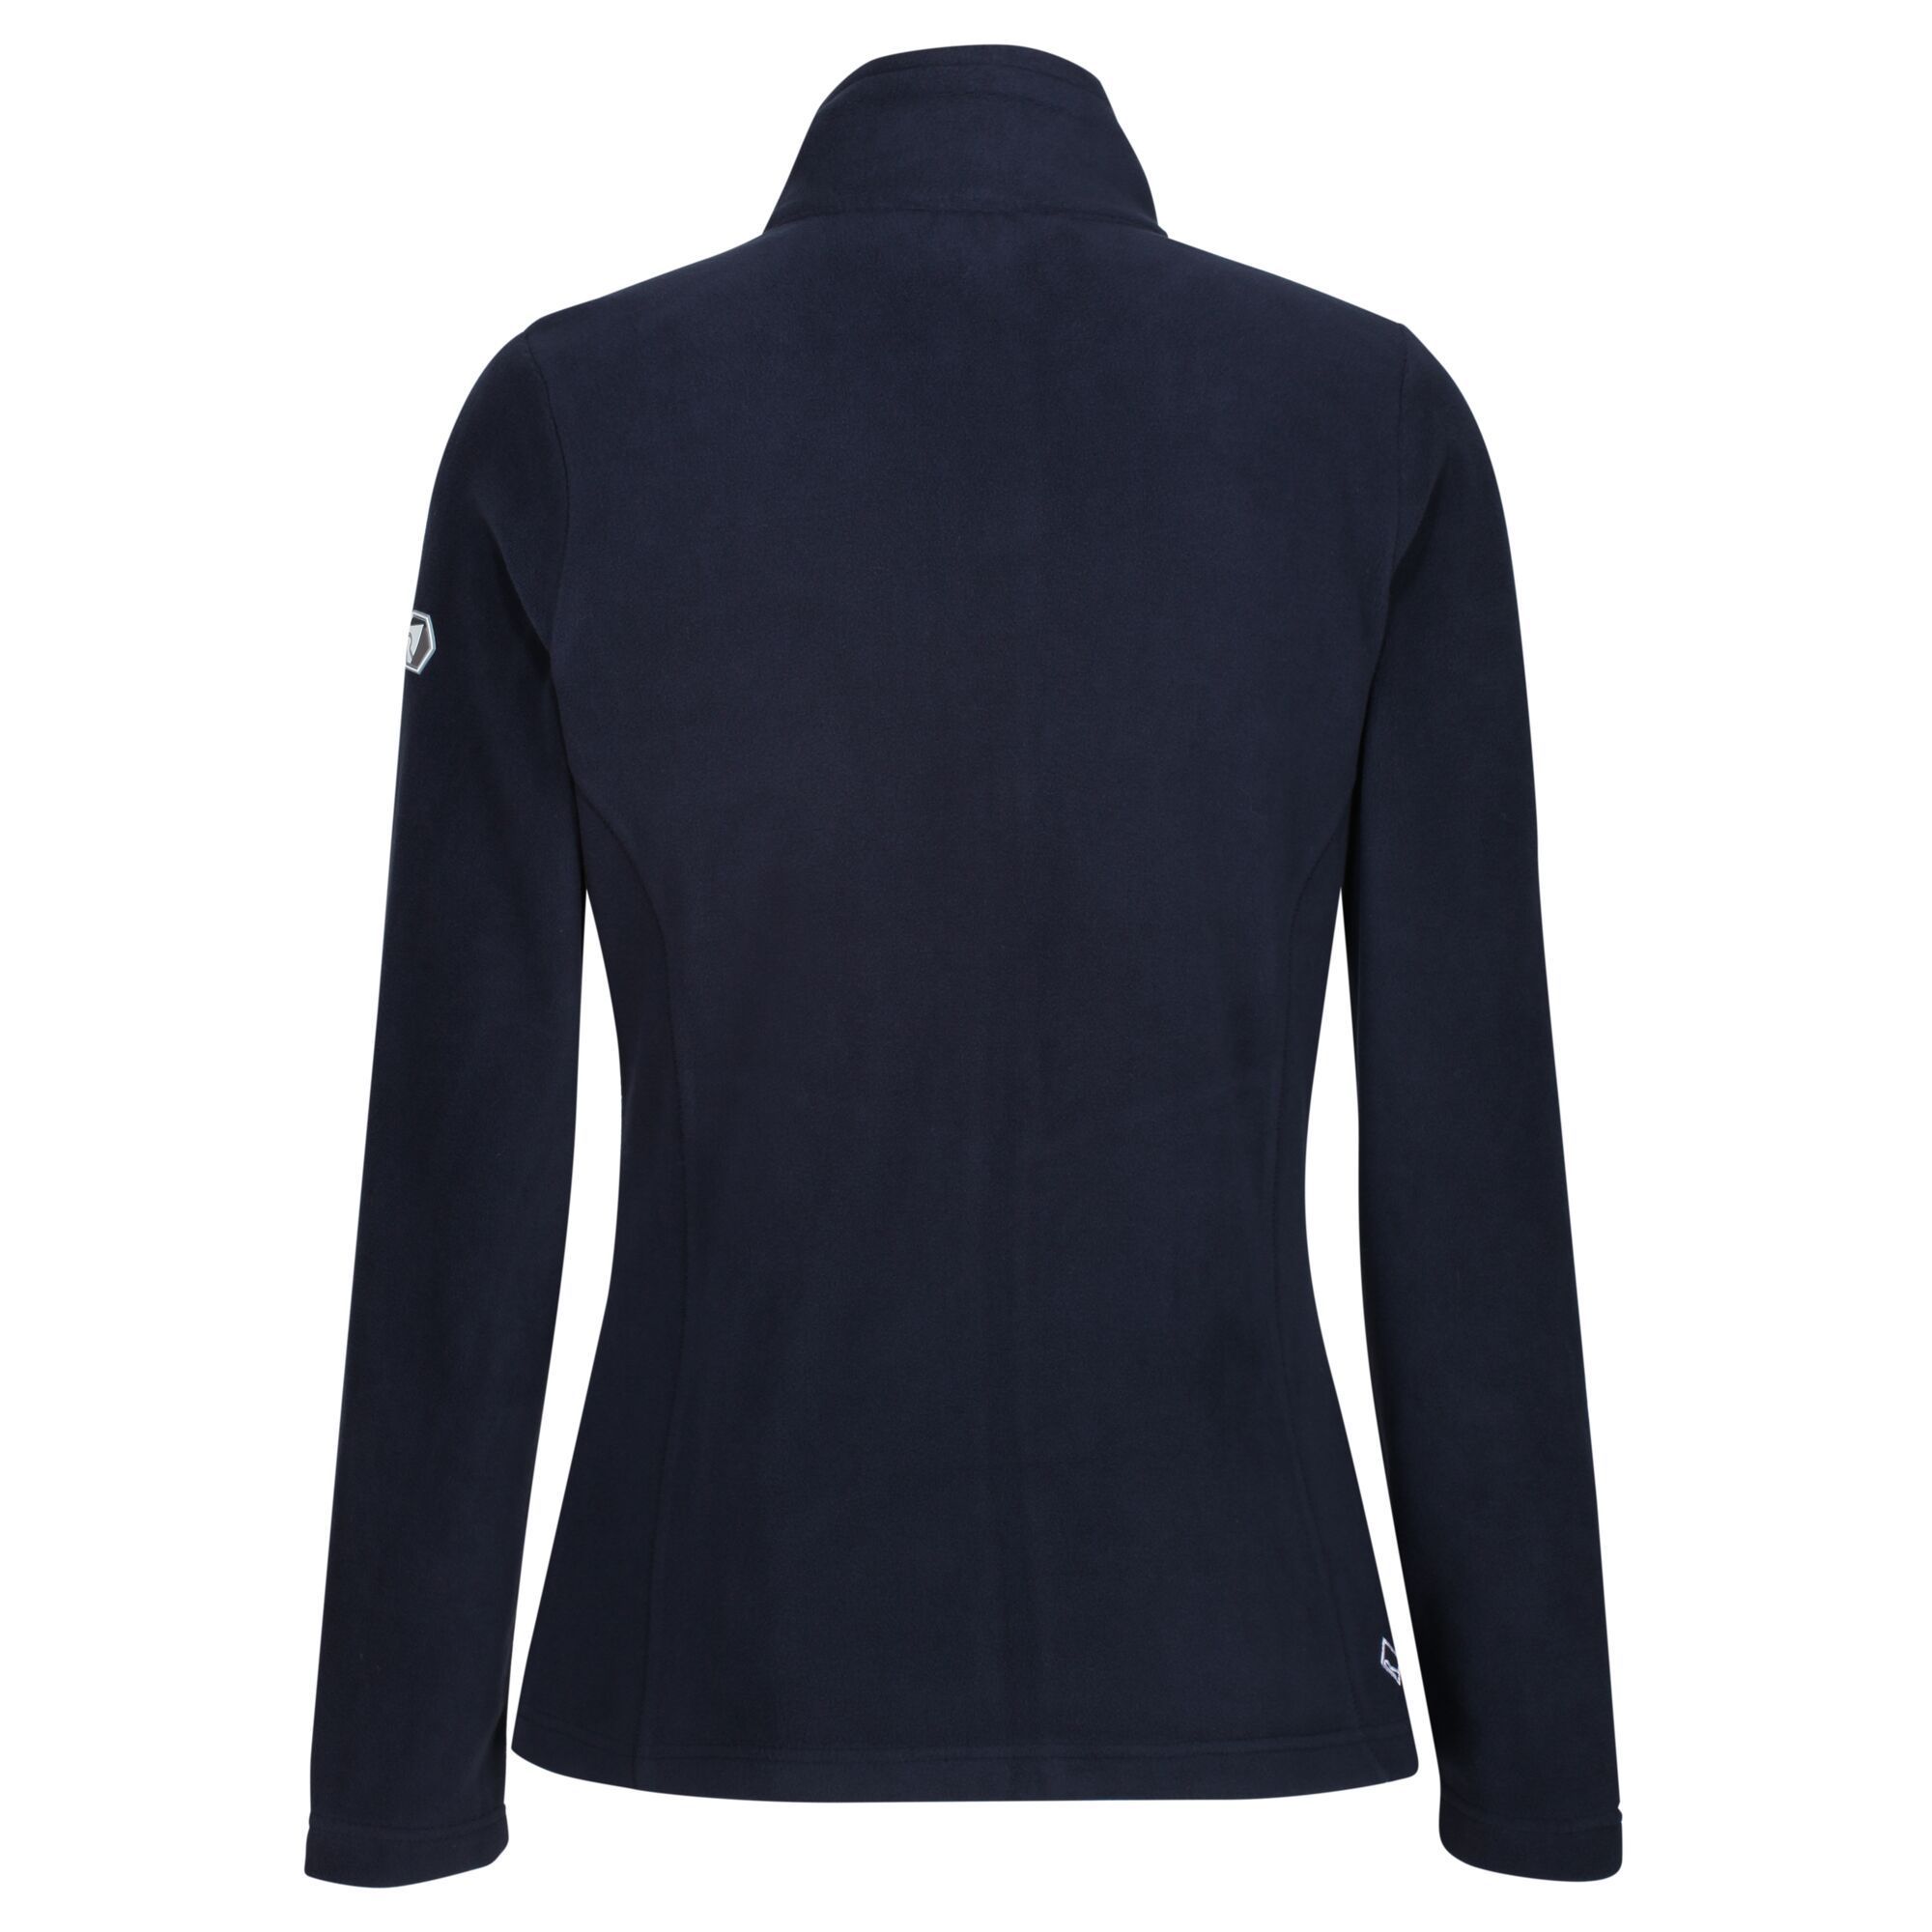 Material: 100% Polyester. Fabric: Brushed, Midweight. 240gsm. Design: Logo. Fabric Technology: Anti-Pilling, Durable, Insulating, Symmetry. Shockcord Hem, Stretch Binding. Cuff: Adjustable. Sleeve-Type: Long-Sleeved. Neckline: Standing Collar. Pockets: 2 Lower Pockets, Zip. Fastening: Full Zip.